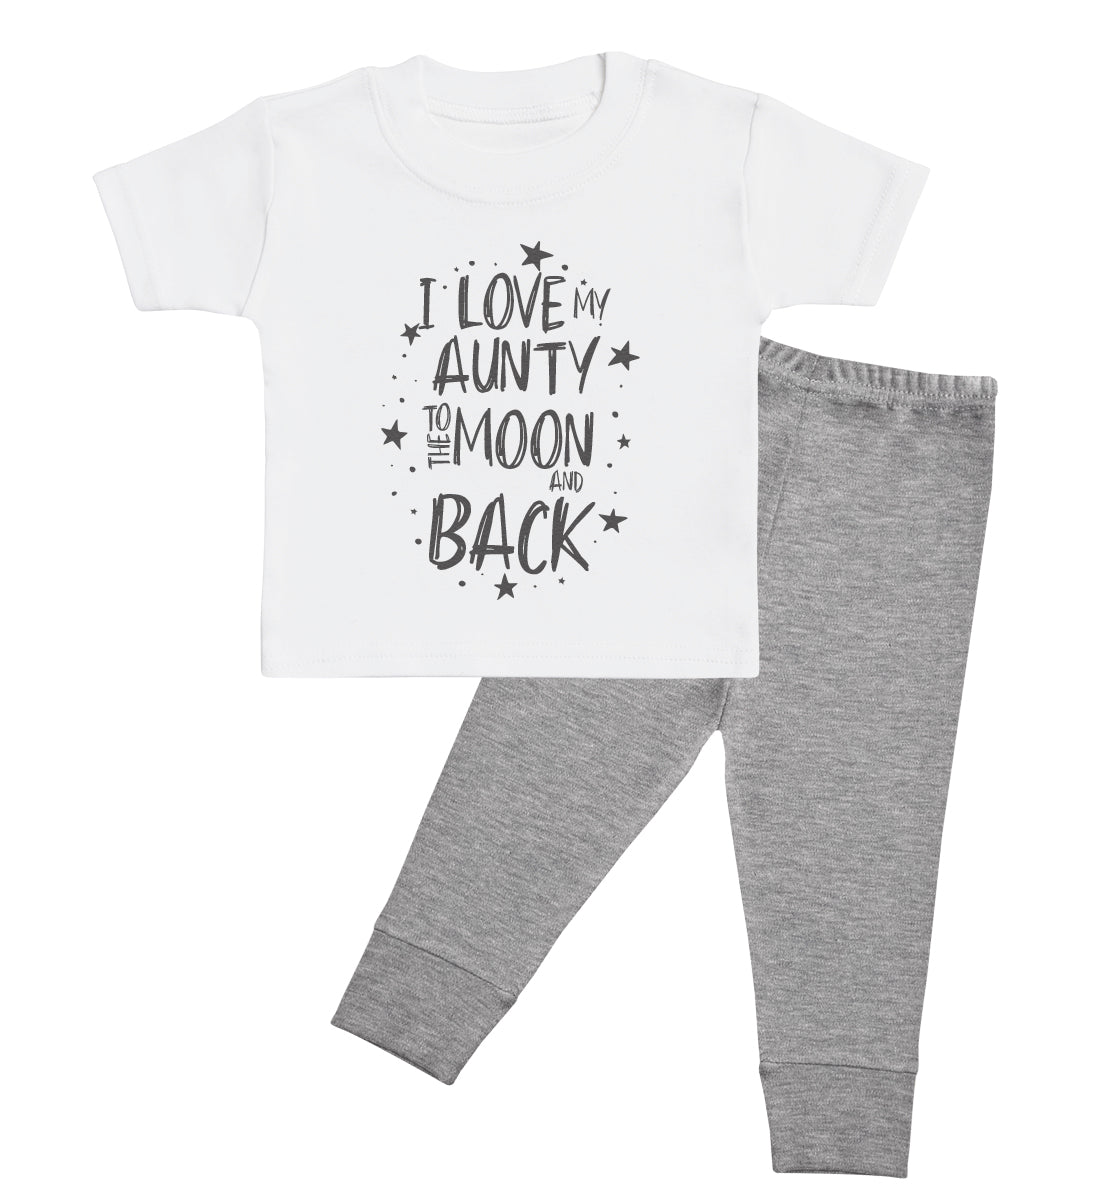 Pick A Family Name - Mummy, Auntie, Grandad and more Moon & Back - Baby Outfit Set